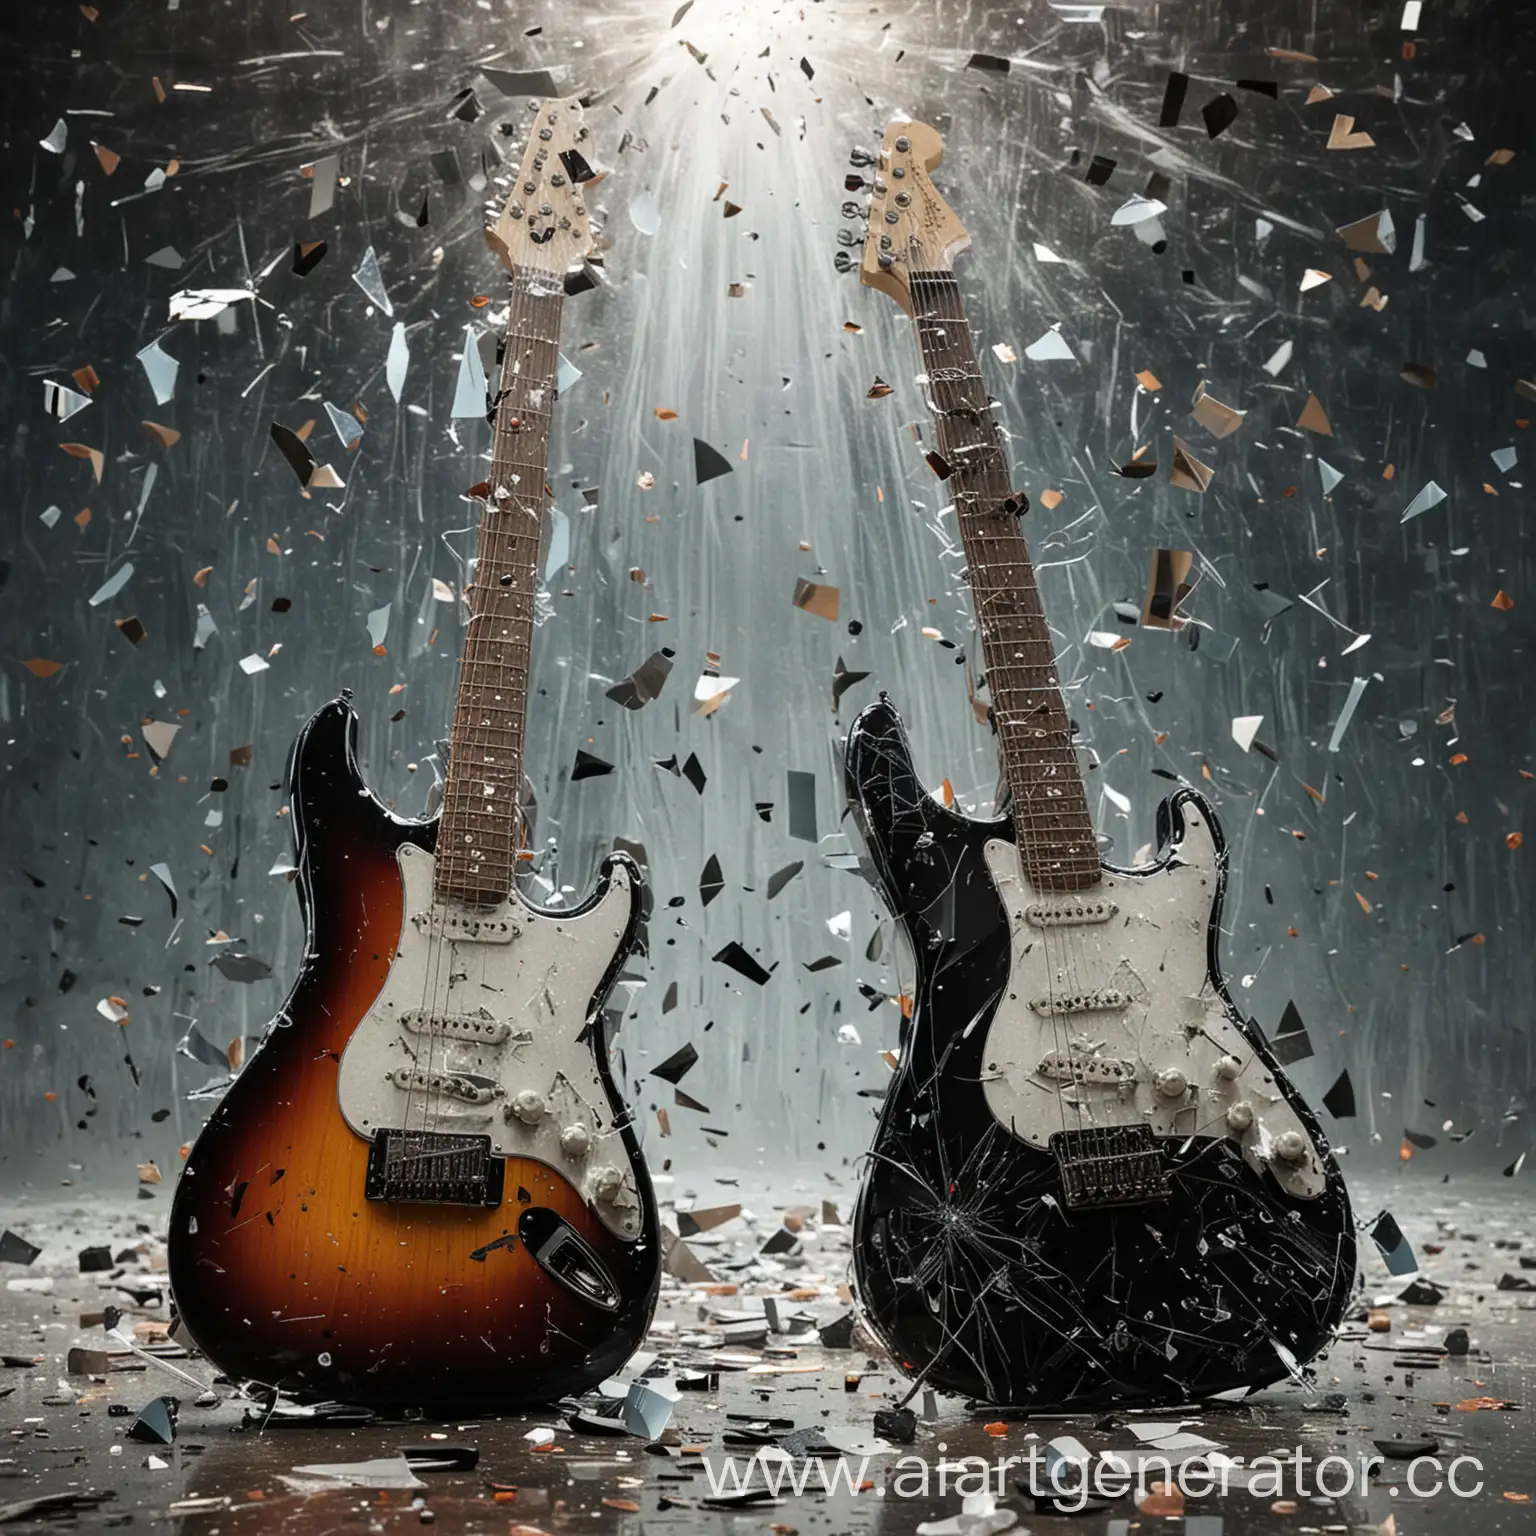 electric guitar and bass guitar in front of shattered glass explosion